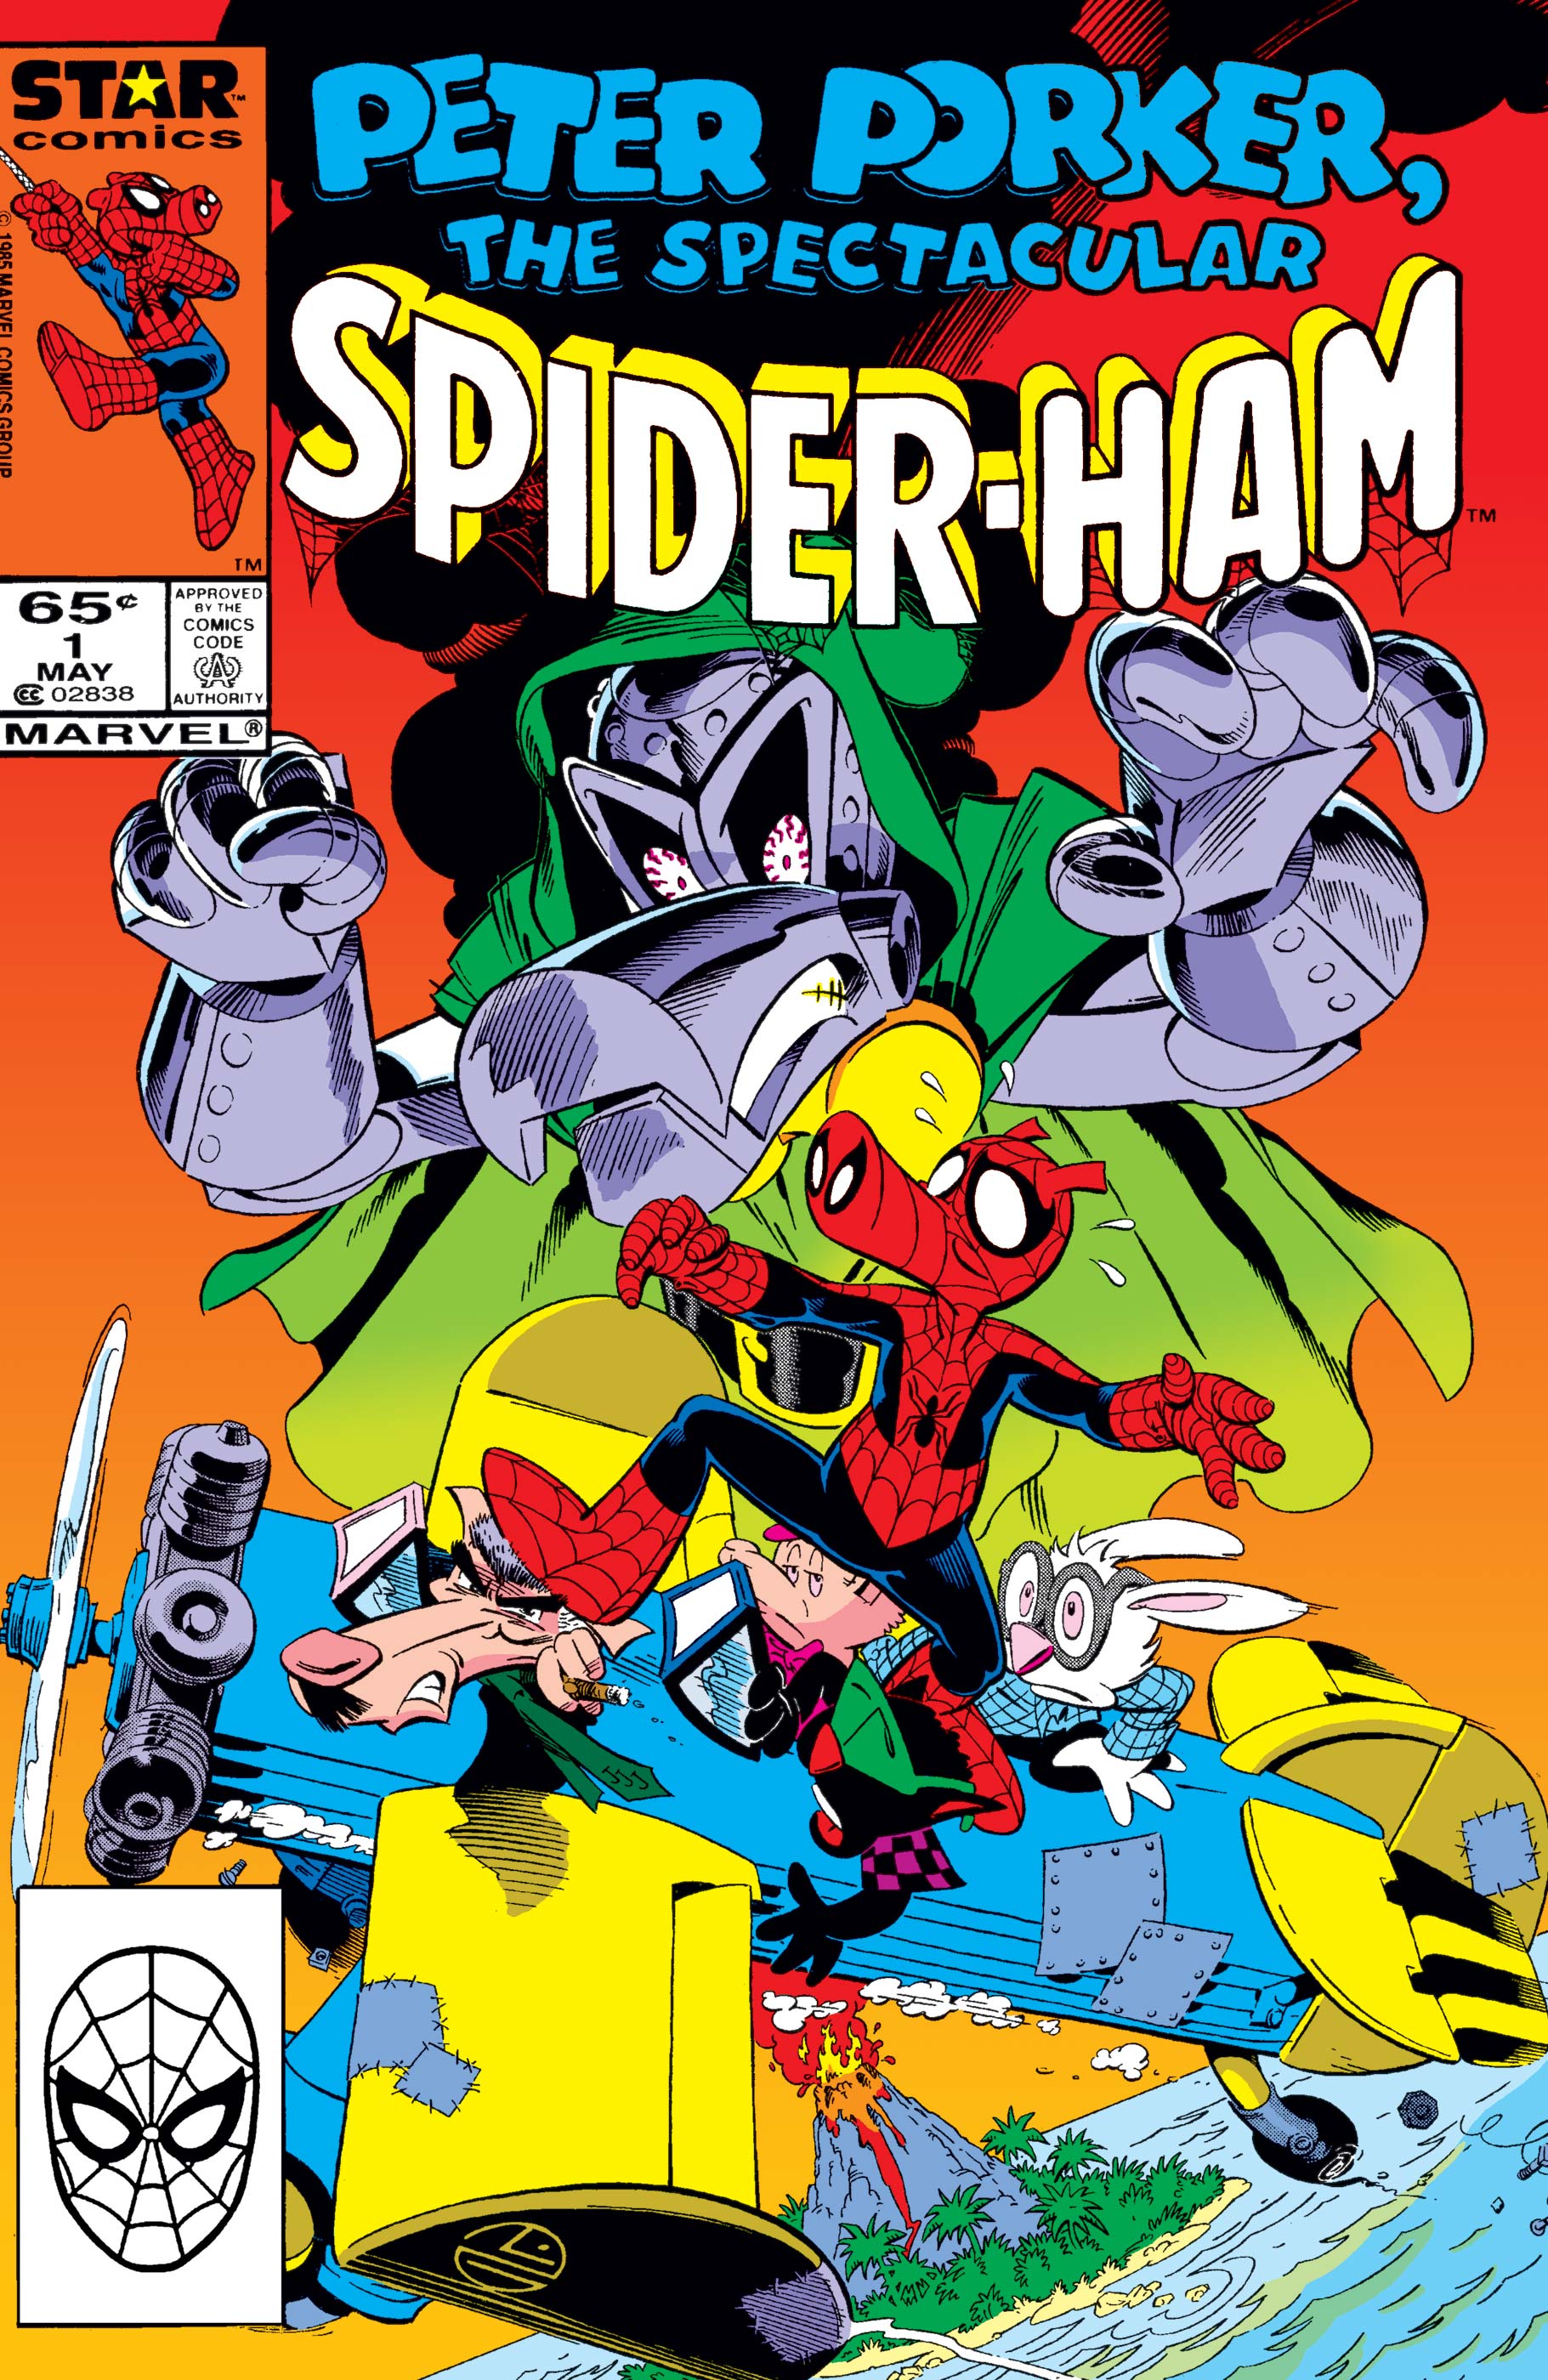 Peter Porker, the Spectacular Spider-Ham (1985) #1 | Comic Issues | Marvel